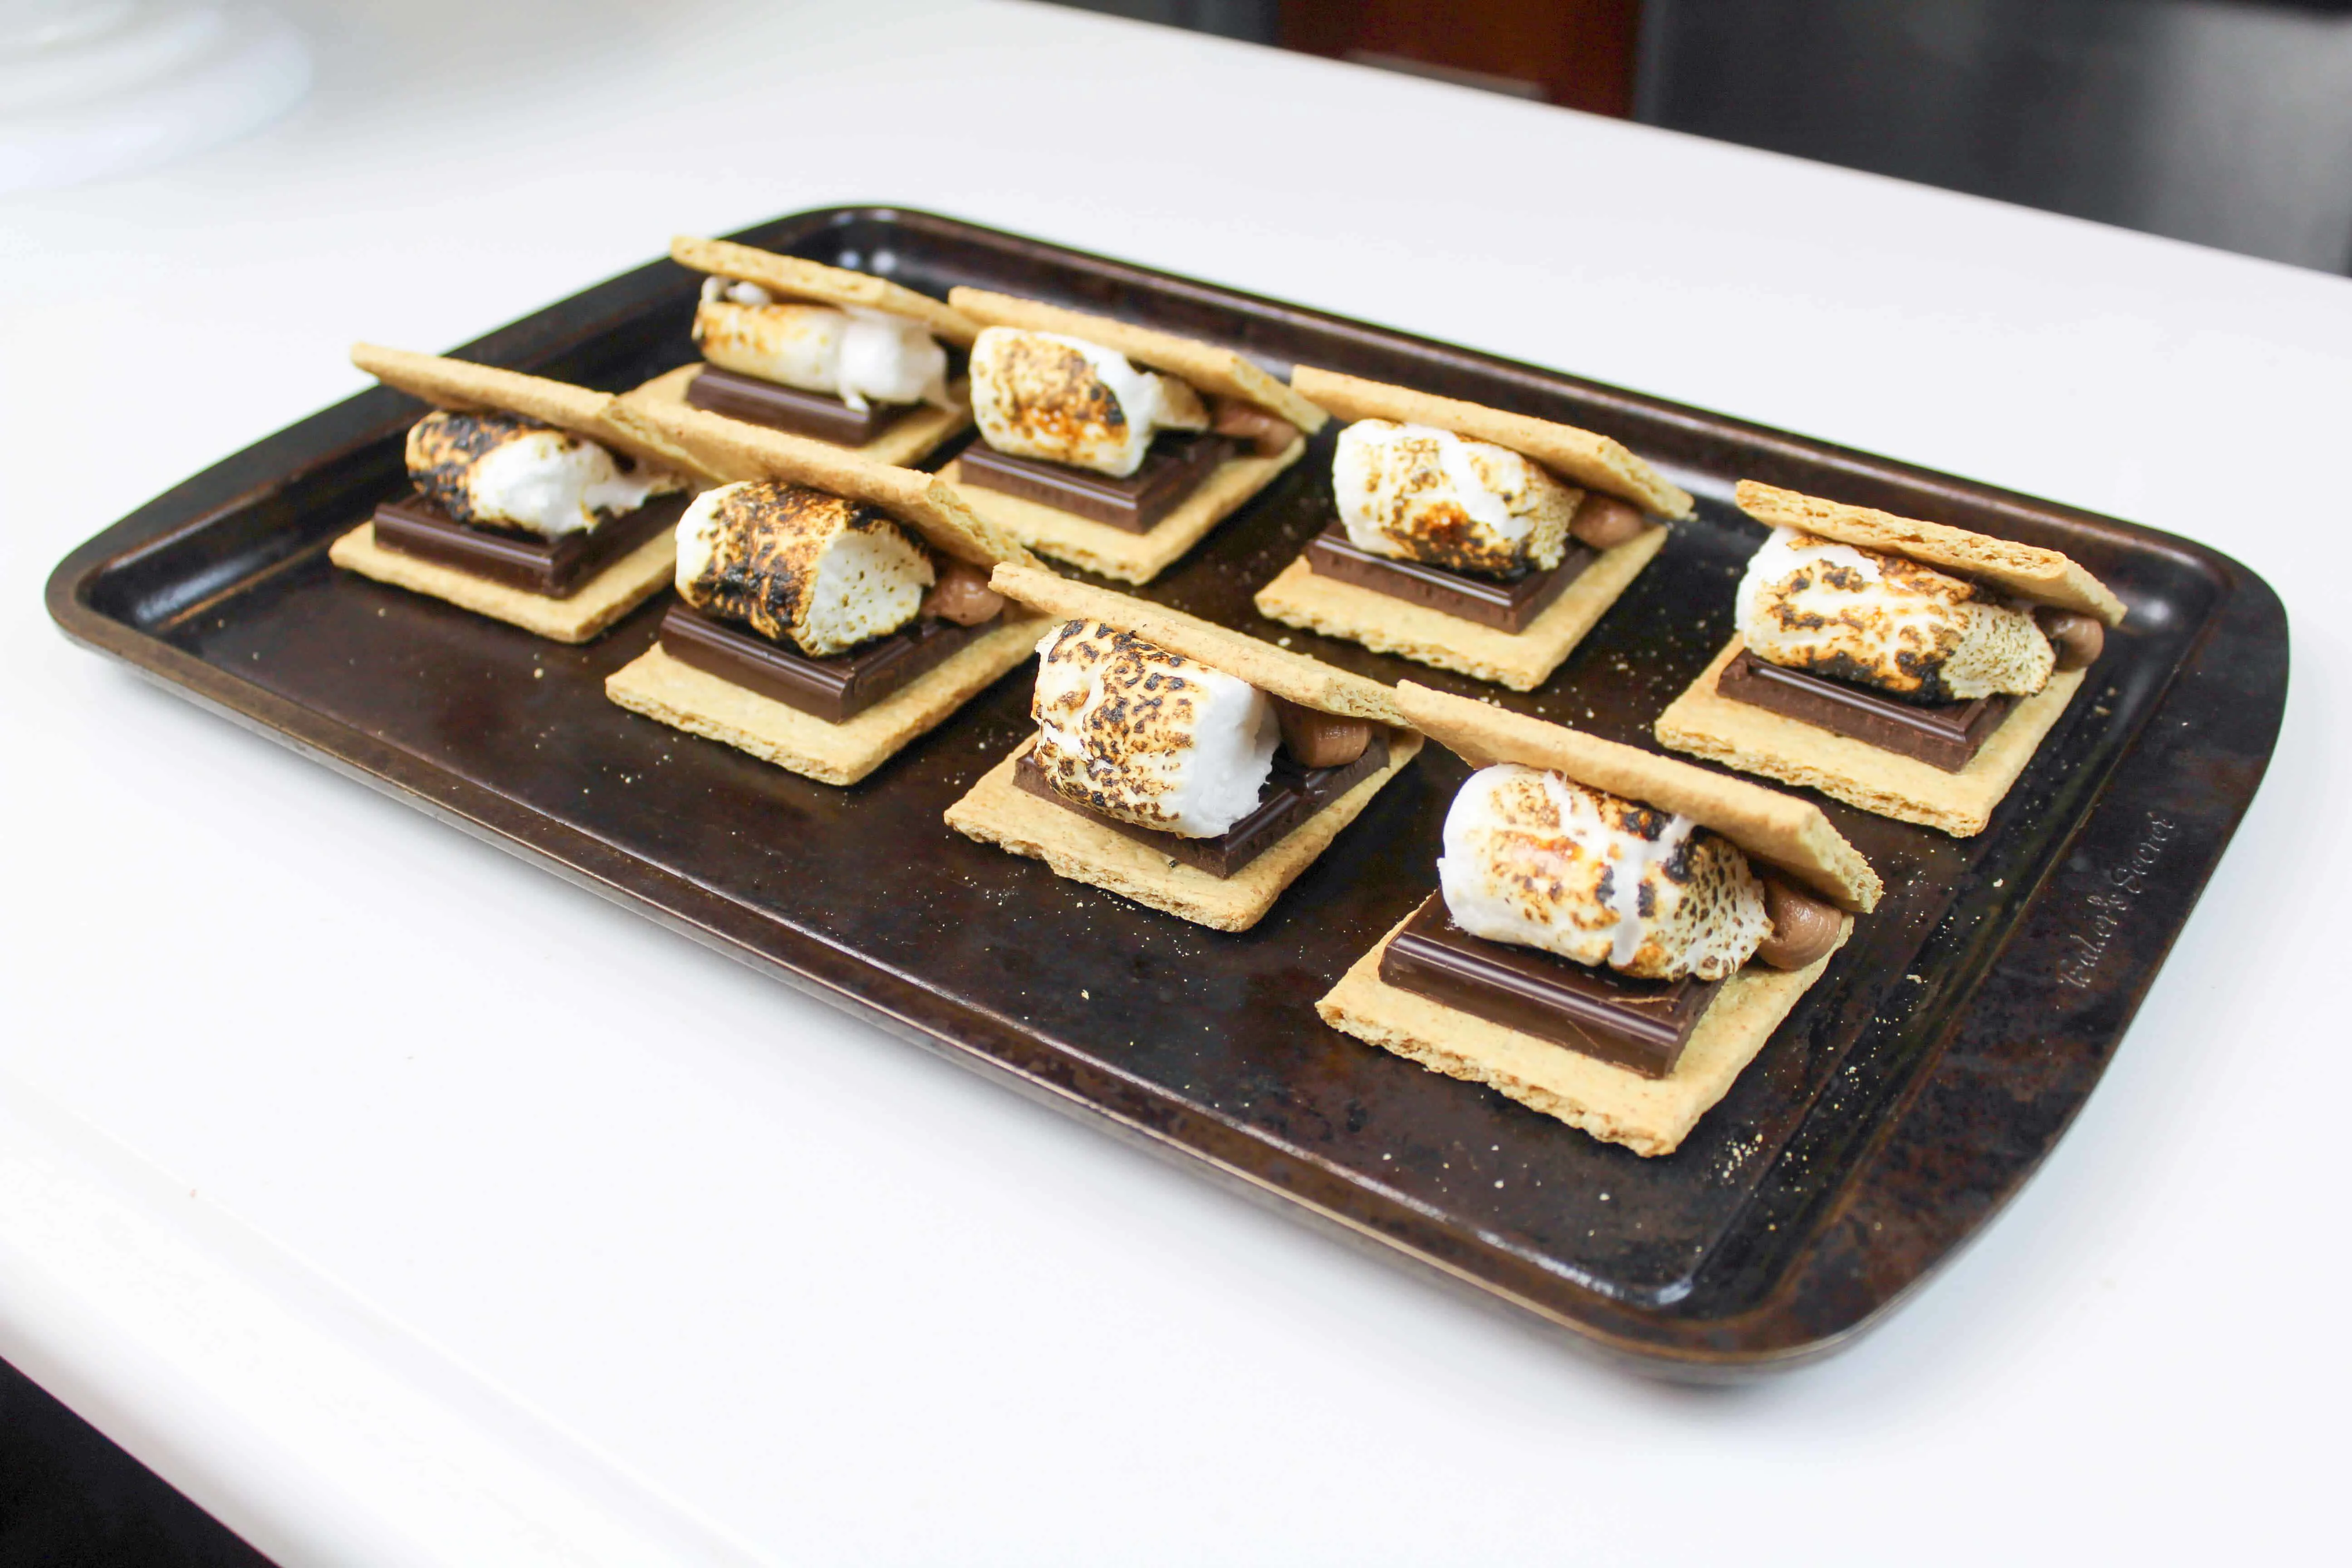 image of mini s'mores made to decorate a cake